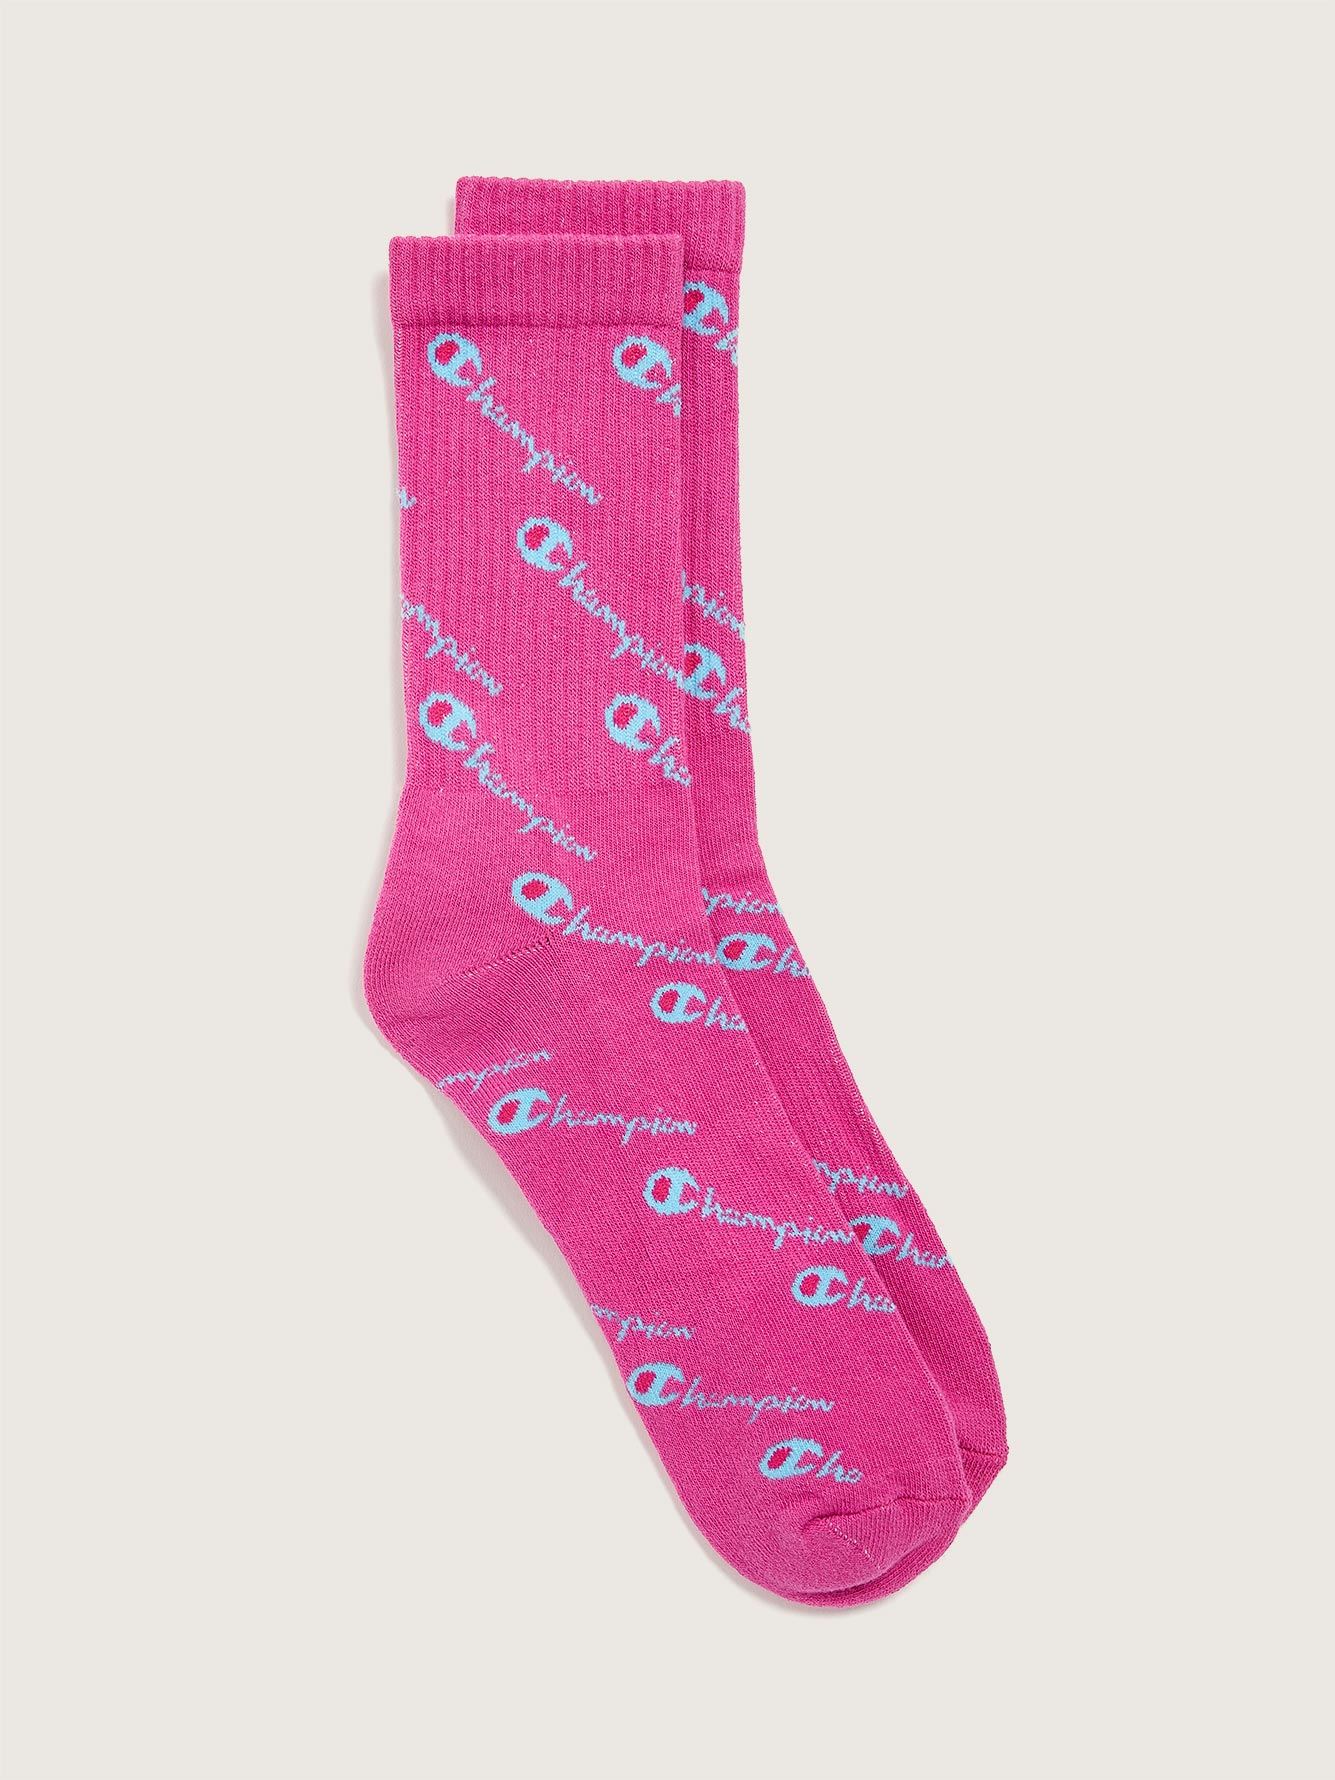 pink champion sock shoes